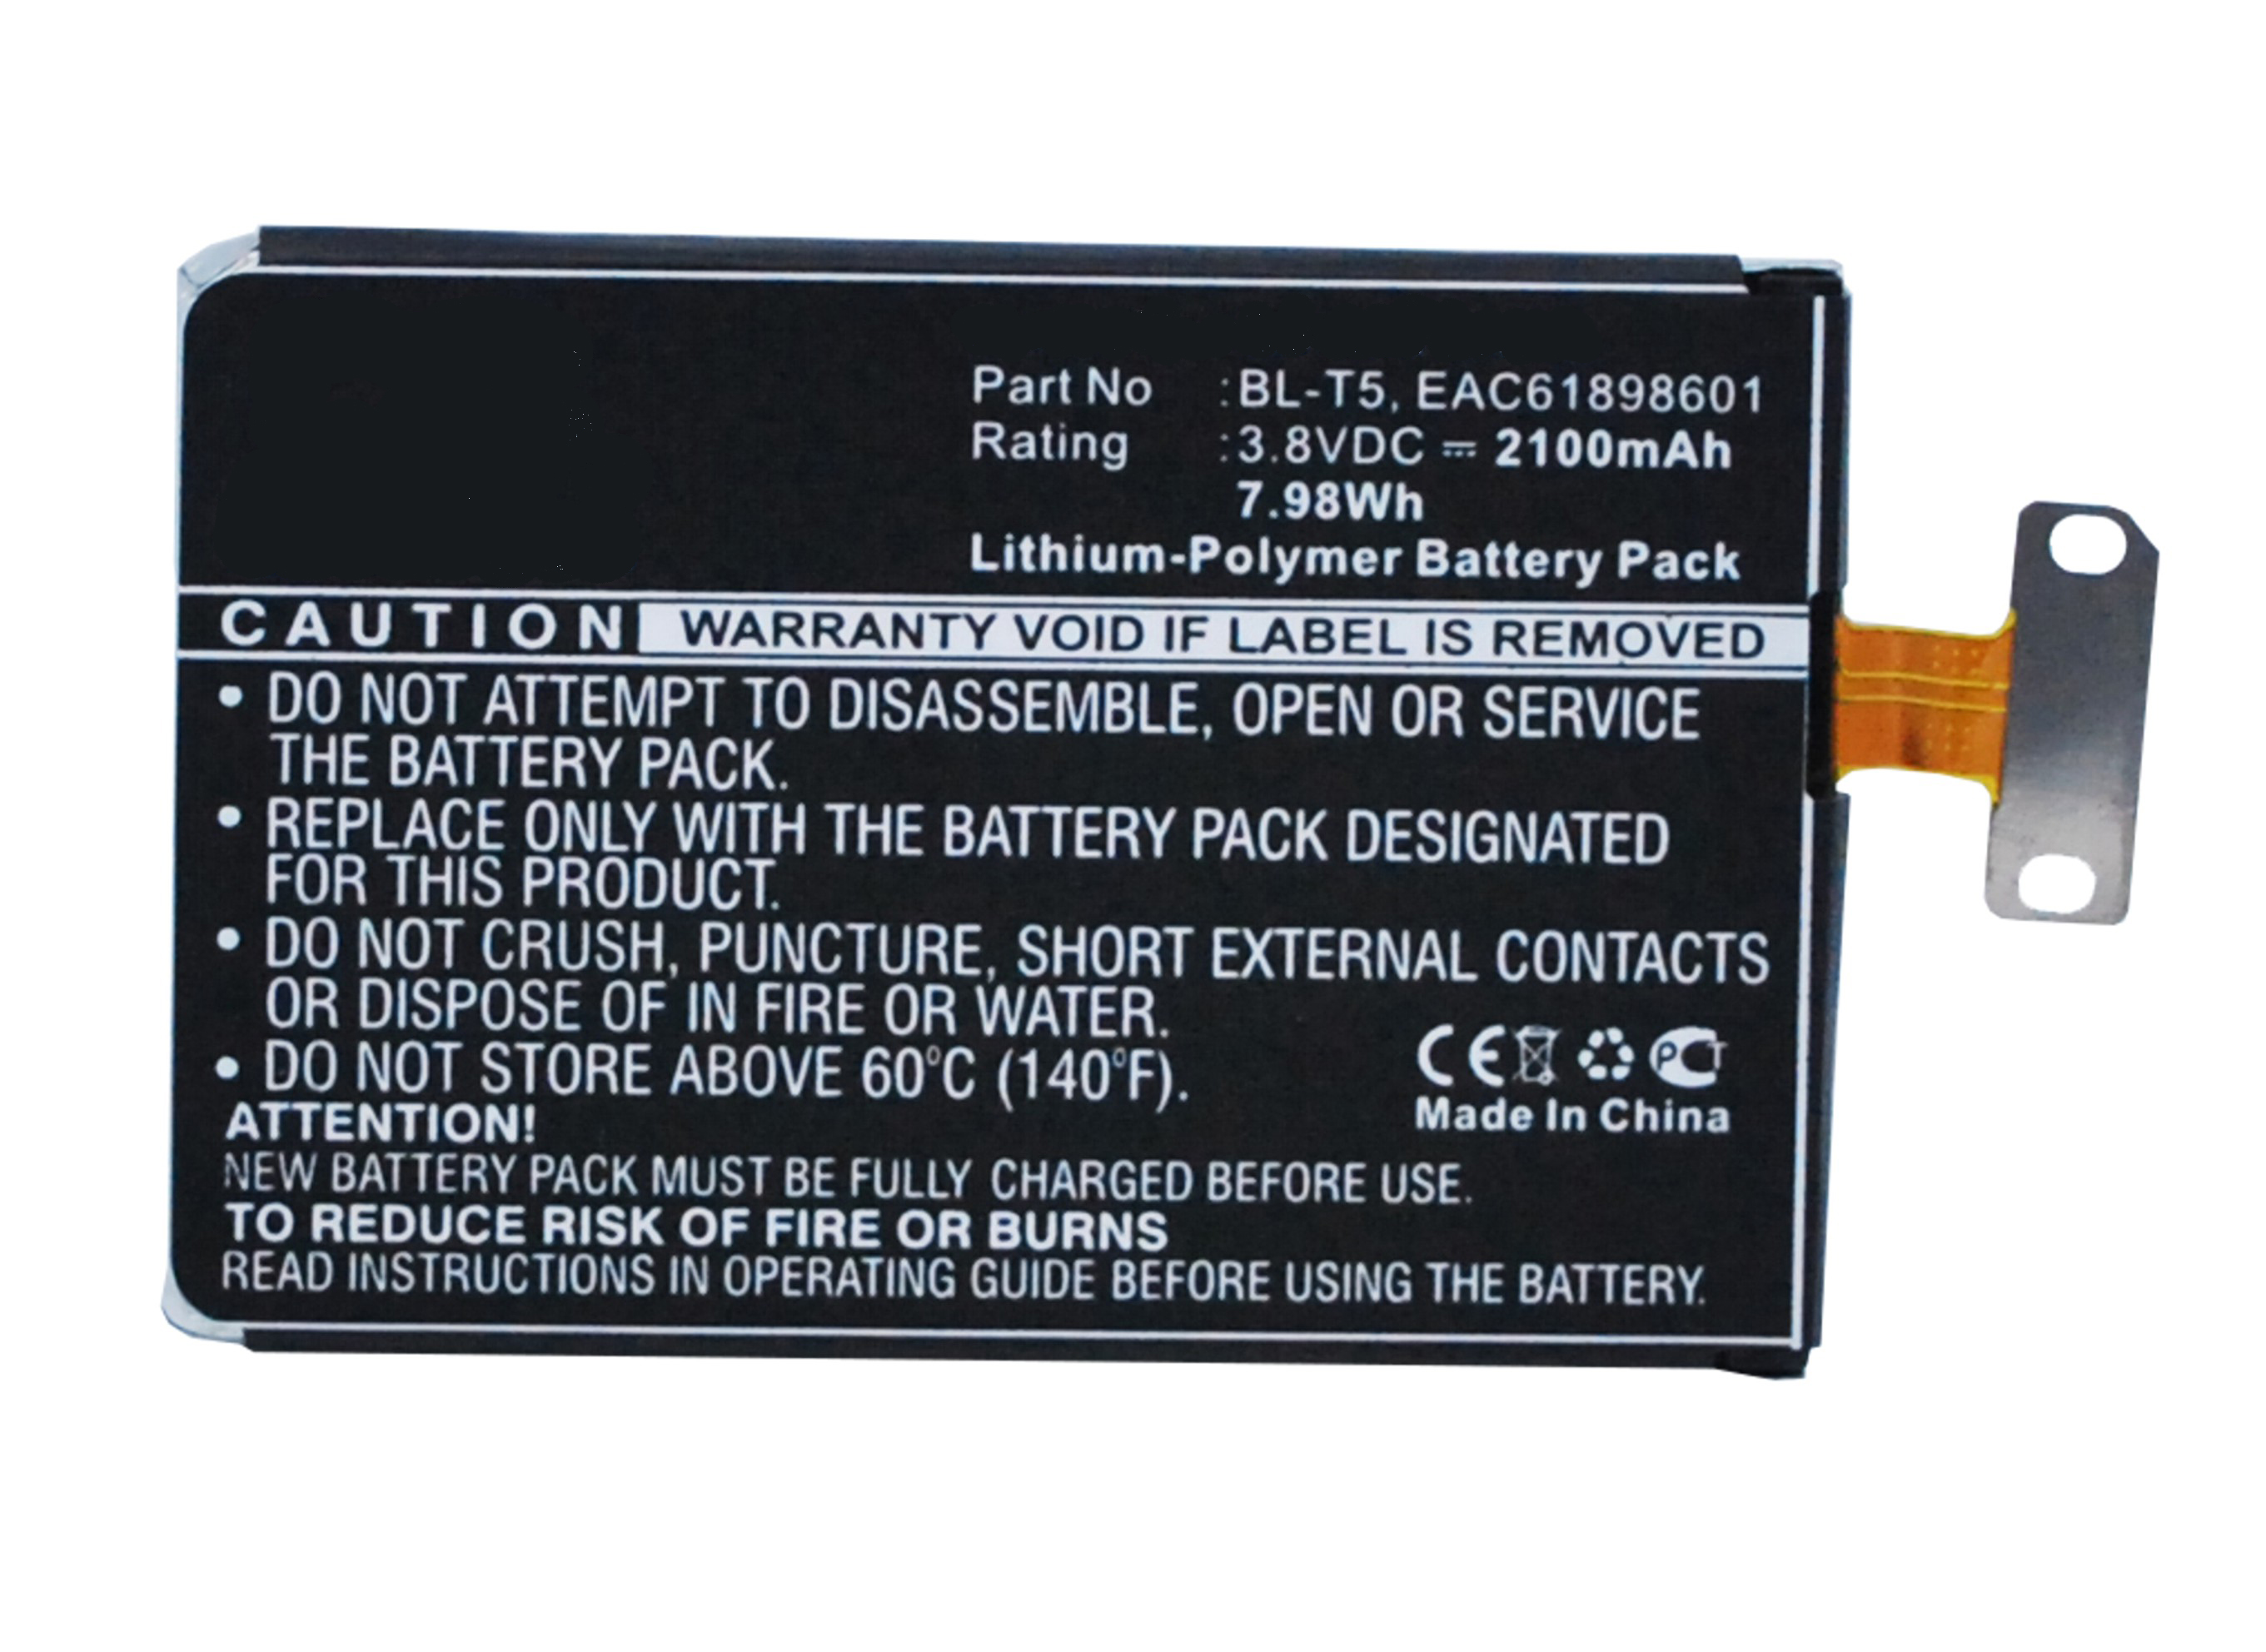 Synergy Digital Cell Phone Battery, Compatiable with LG BL-T5, EAC61898601 Cell Phone Battery (3.8V, Li-Pol, 2100mAh)